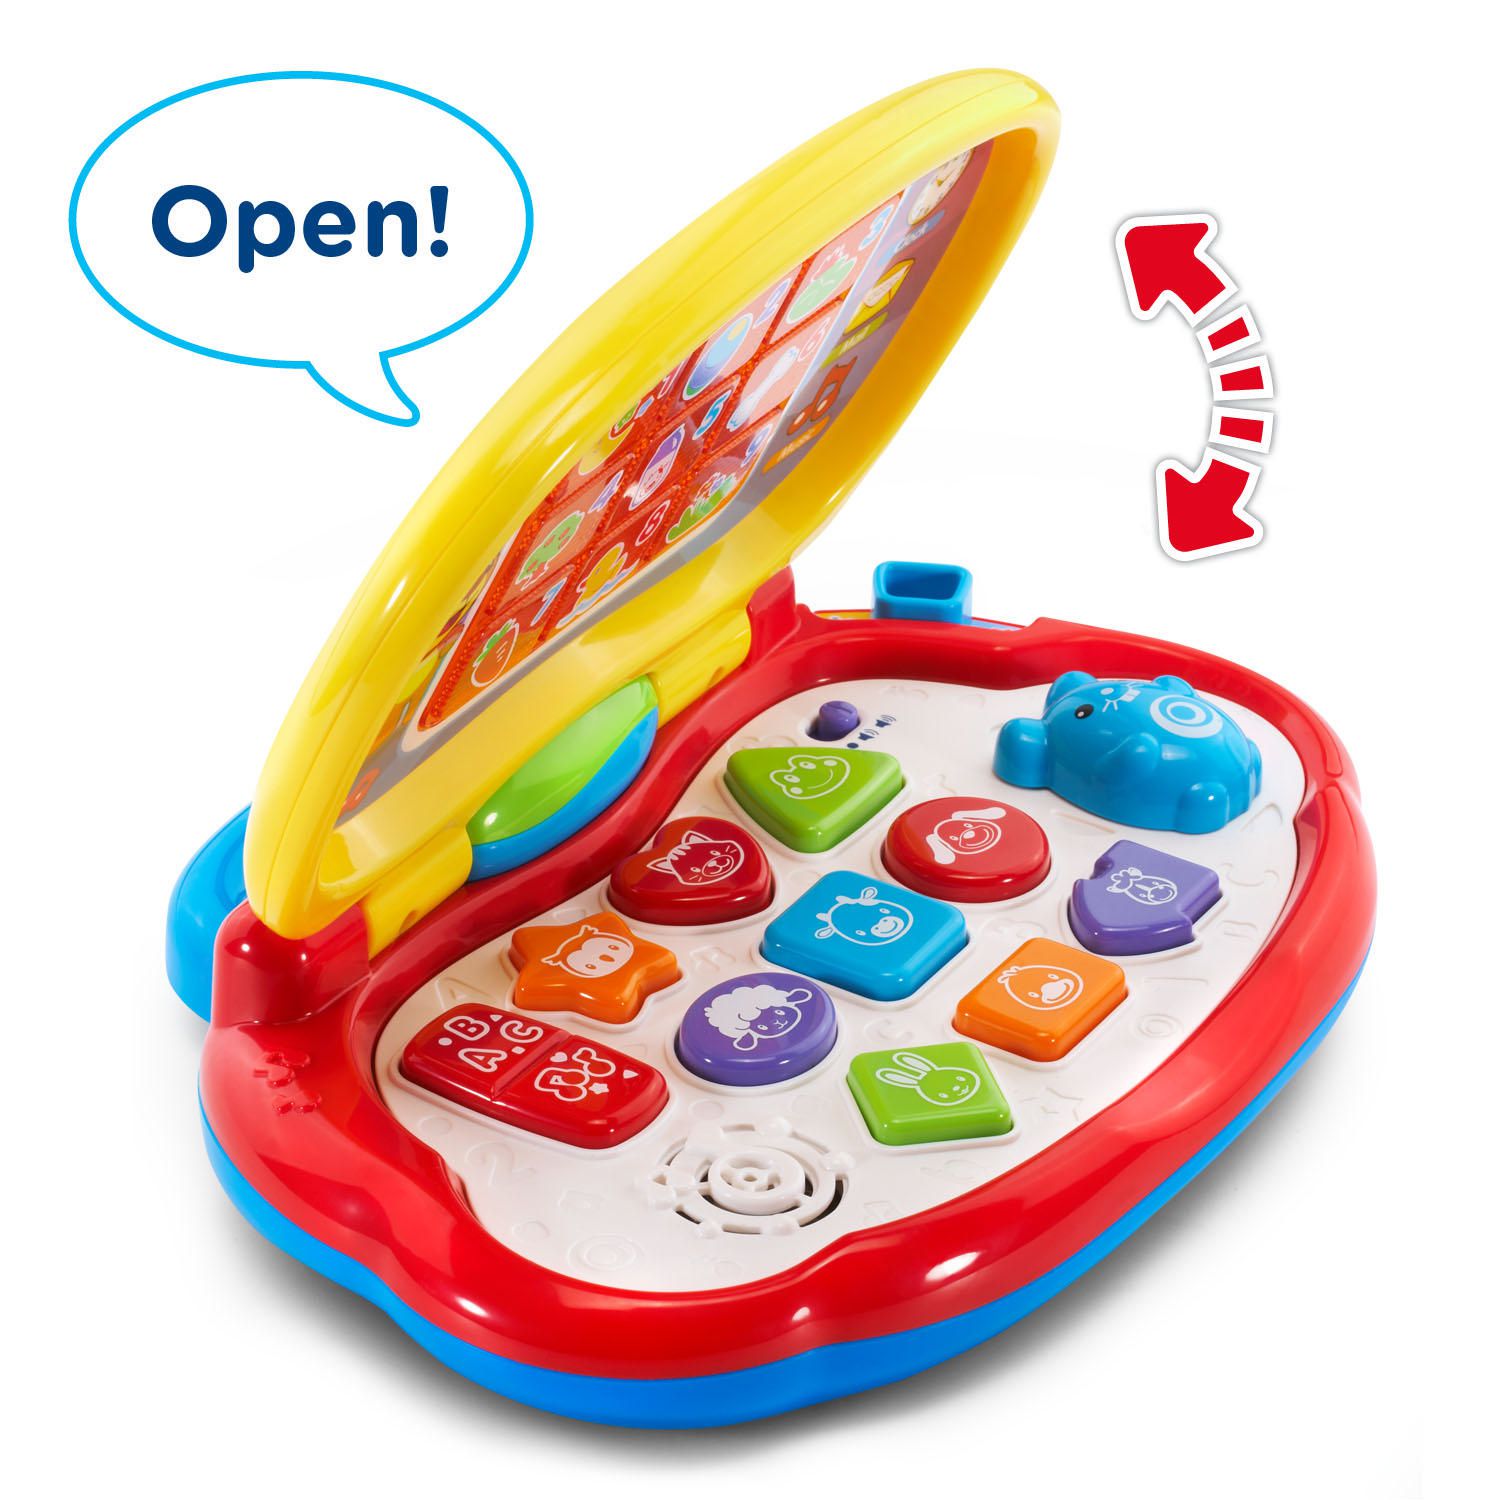 VTech Brilliant Baby Laptop Learning Interactive Travel Kids Light up A2 for sale online 